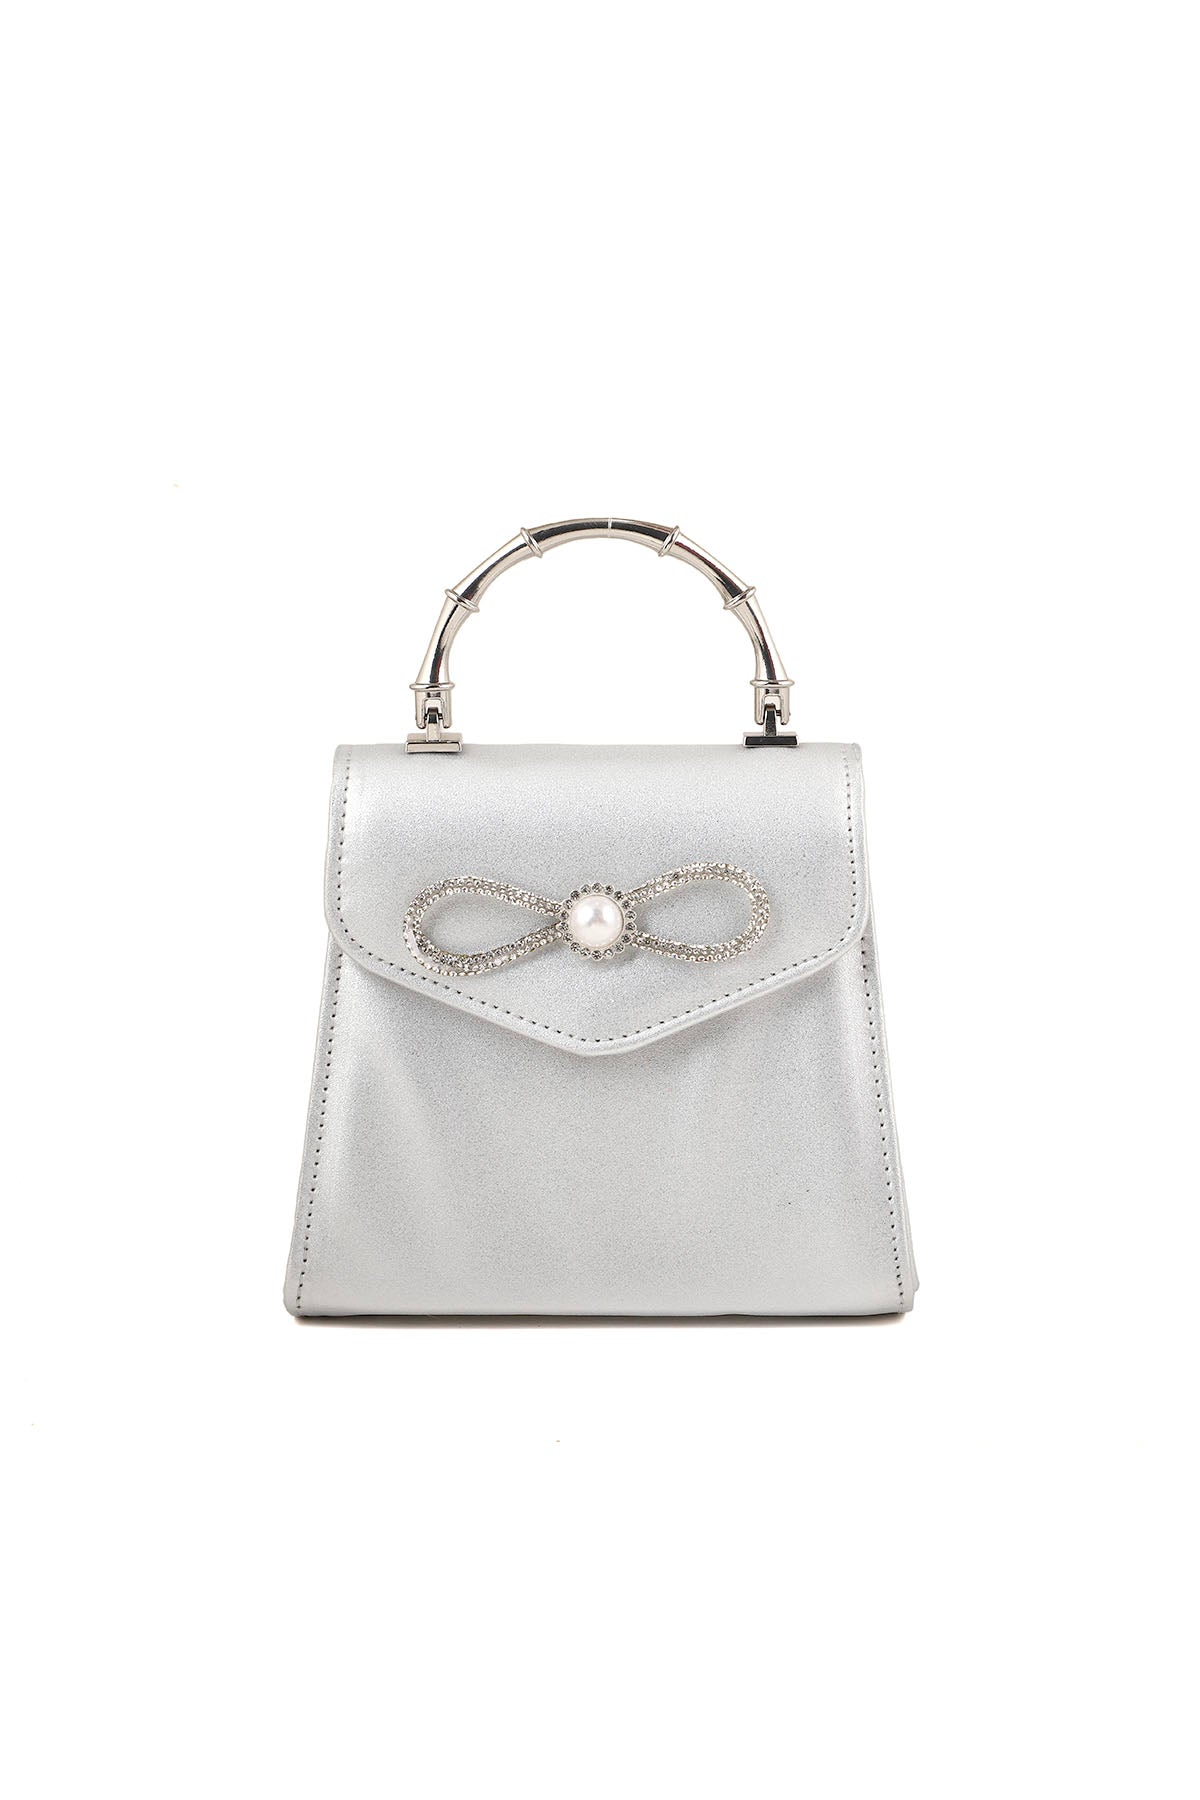 Top Handle Hand Bags B21592-Silver